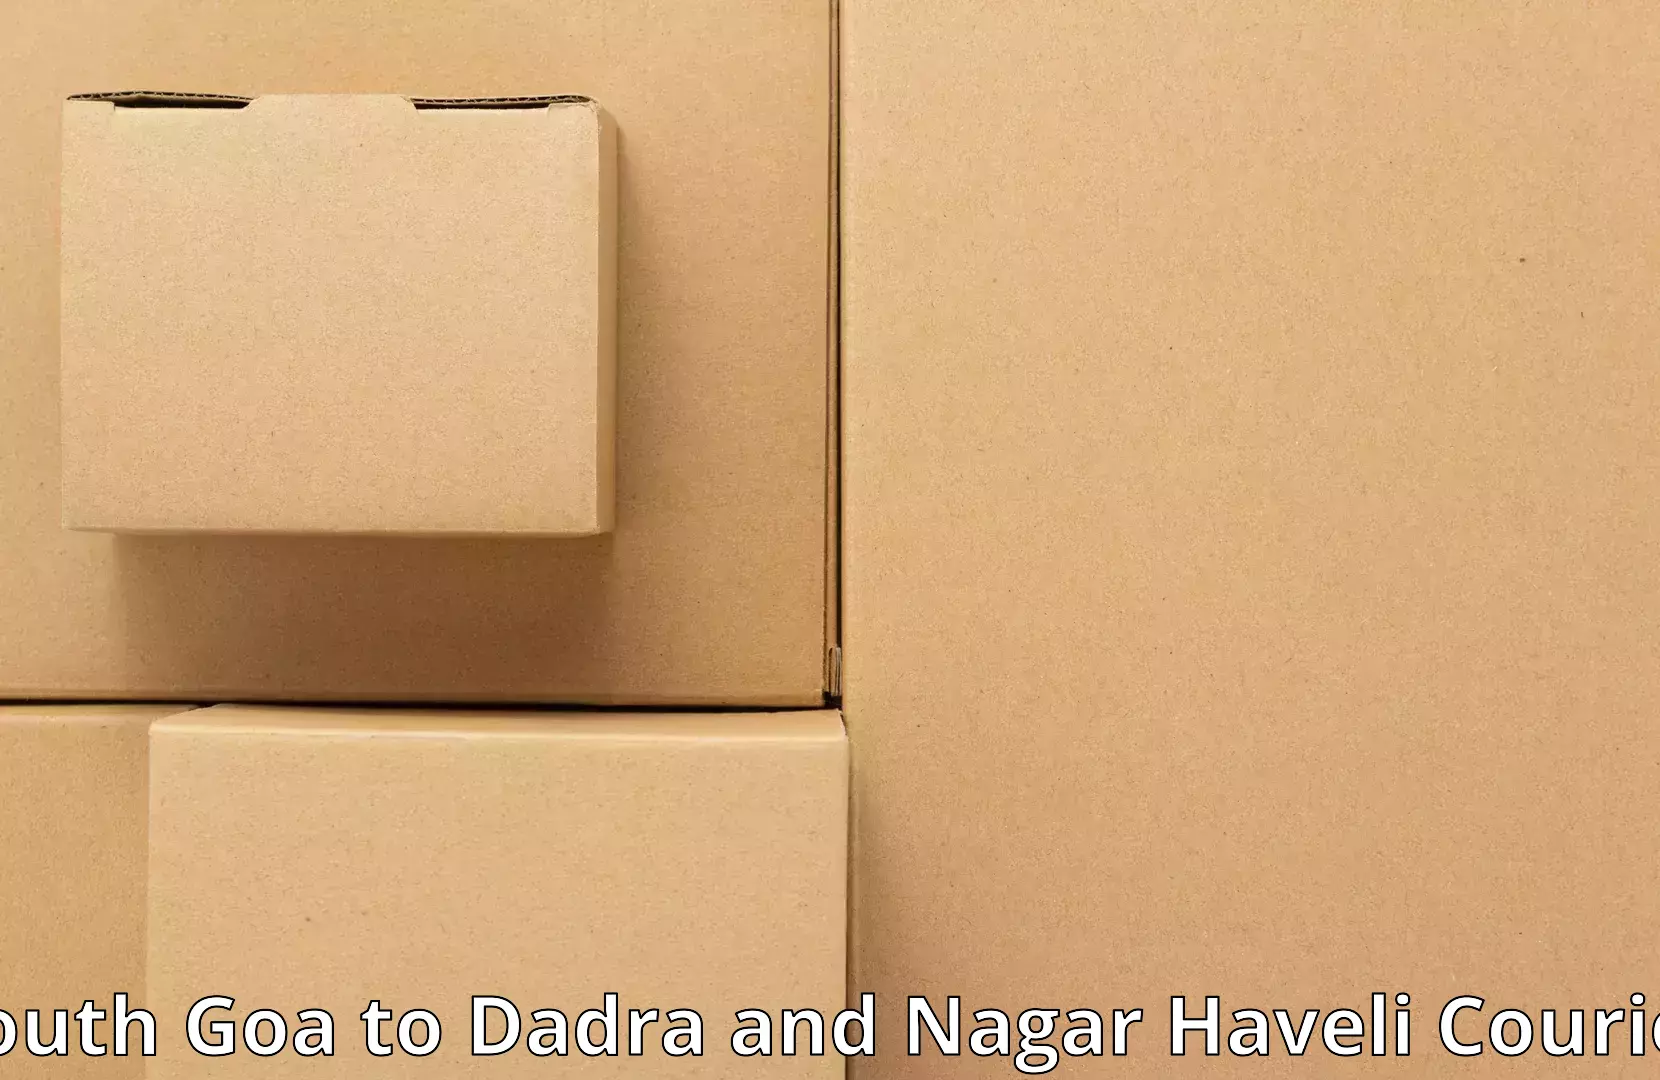 Moving and storage services in South Goa to Silvassa